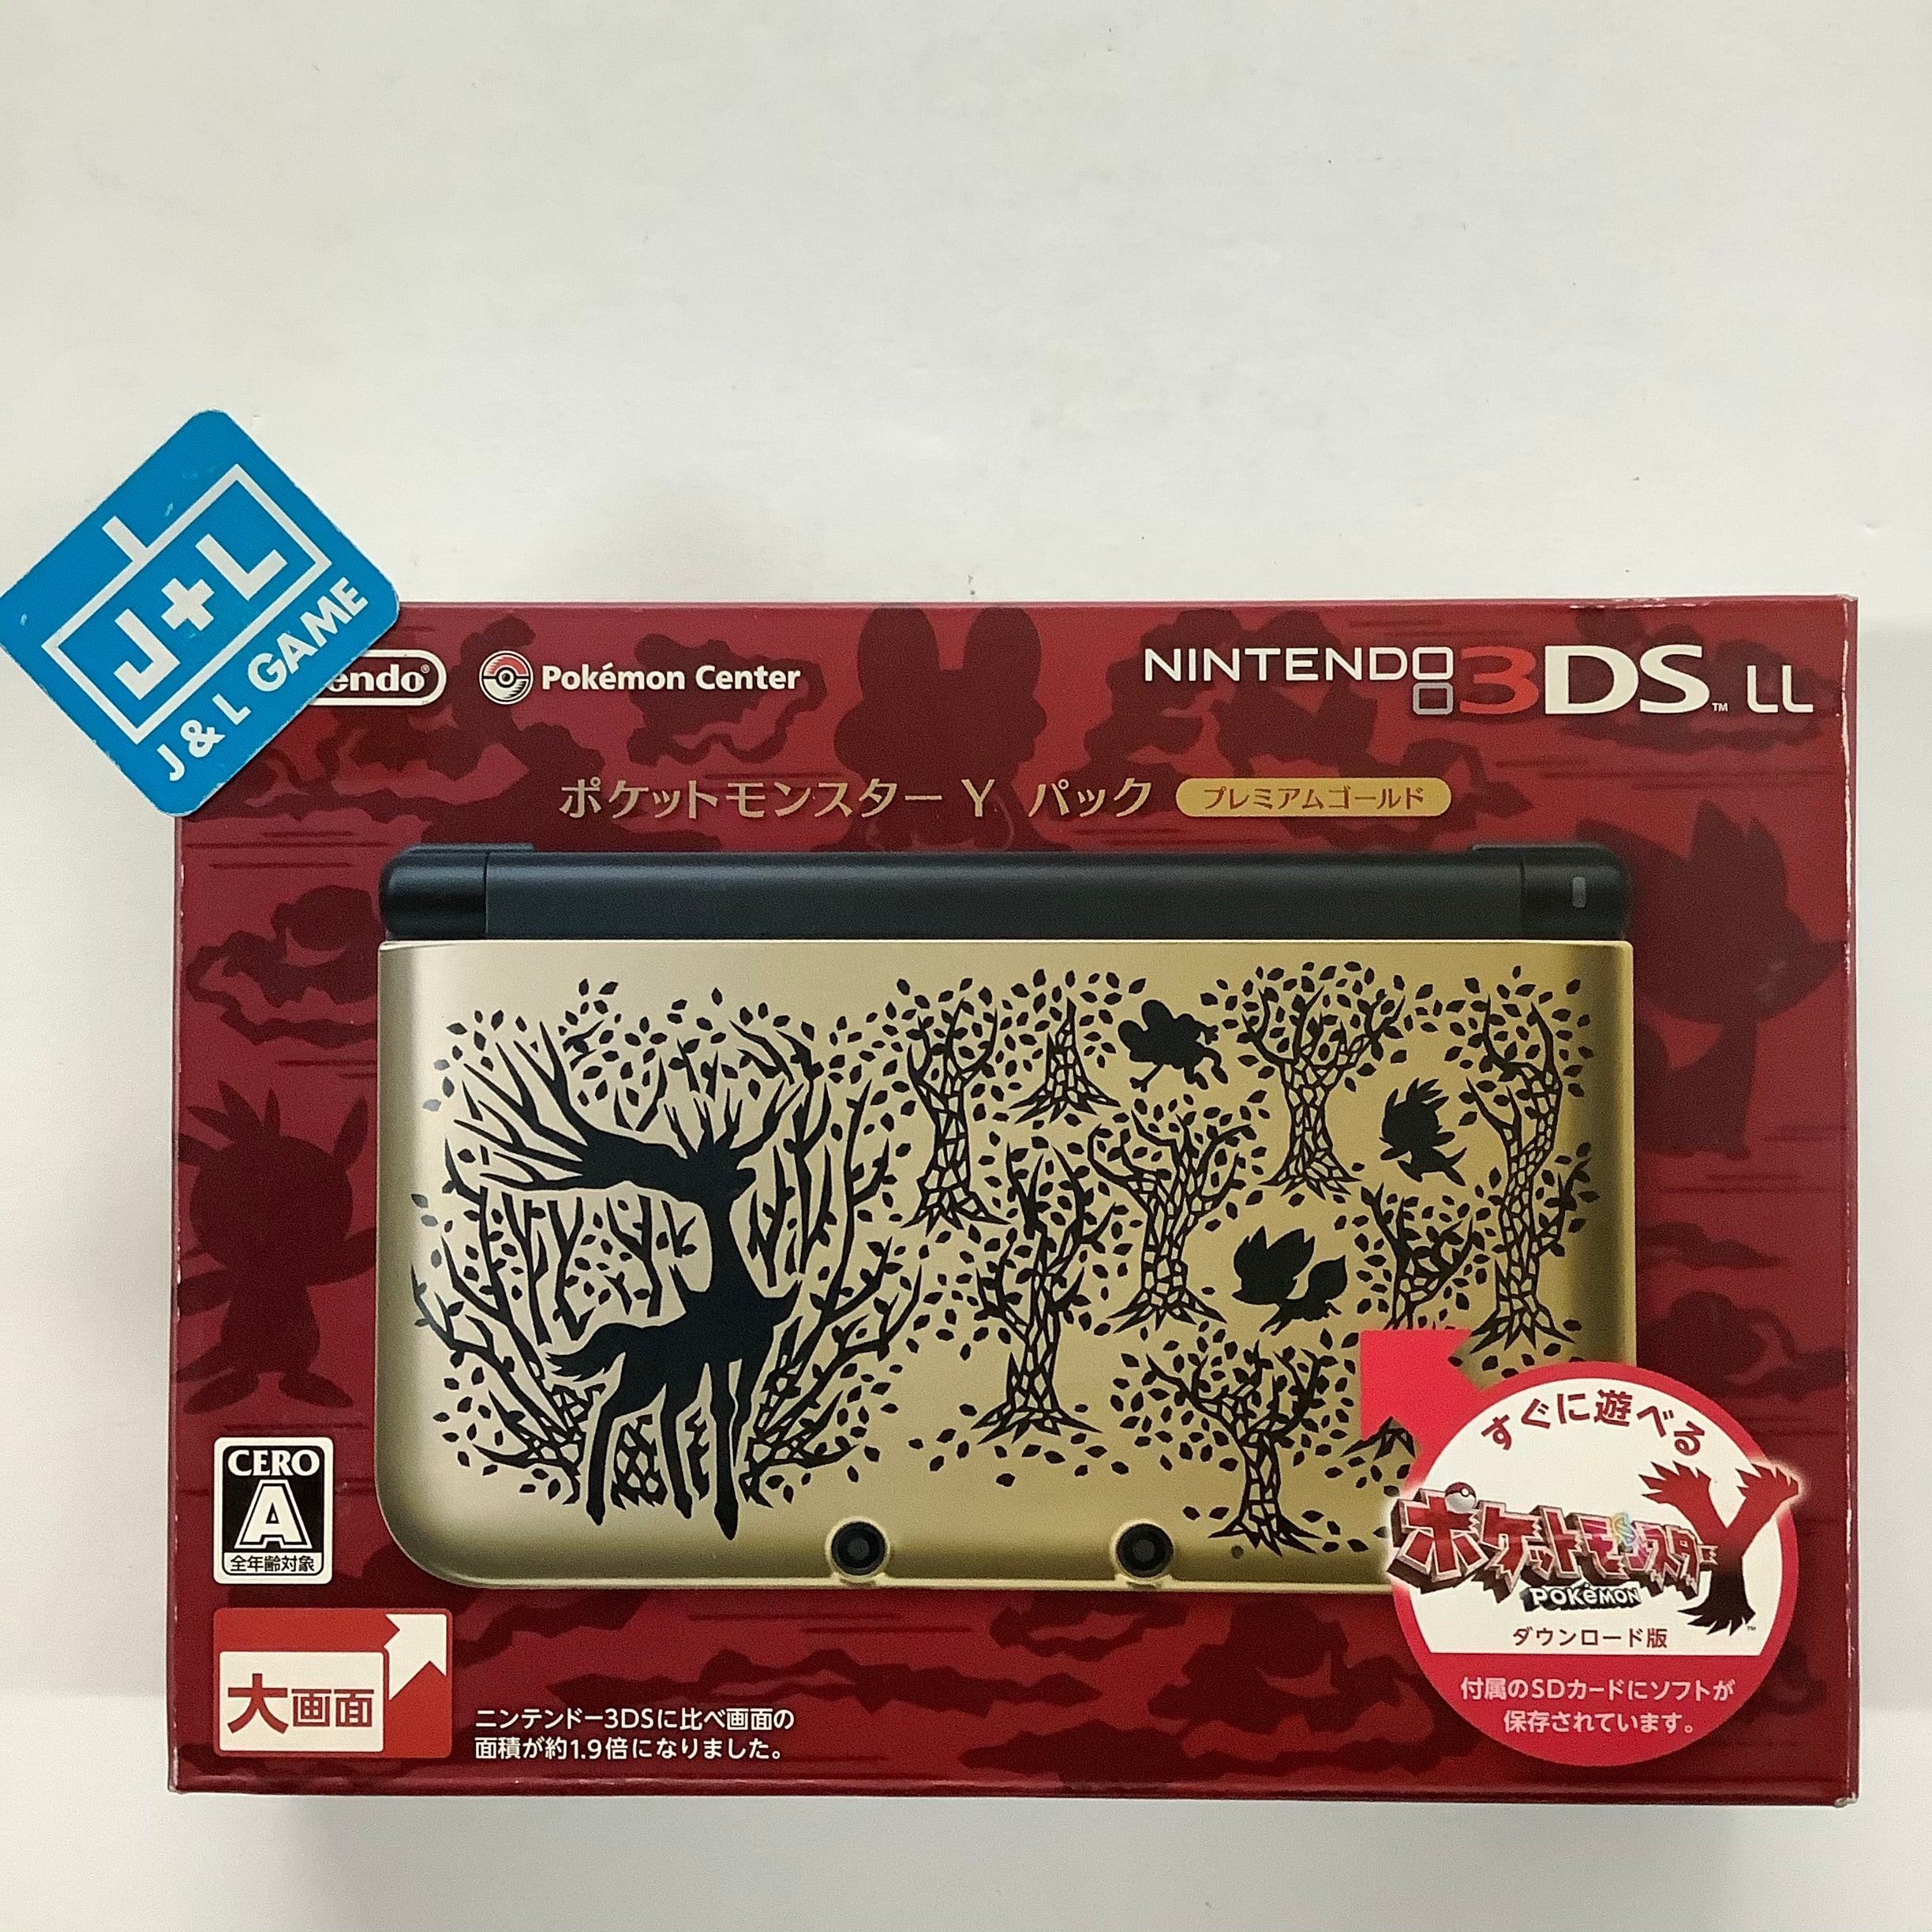 Nintendo 3ds LL Pocket Monsters Y Pack Premium Gold (Limited Edition) - (3DS) Nintendo 3DS ( Japanese Import ) CONSOLE Nintendo   